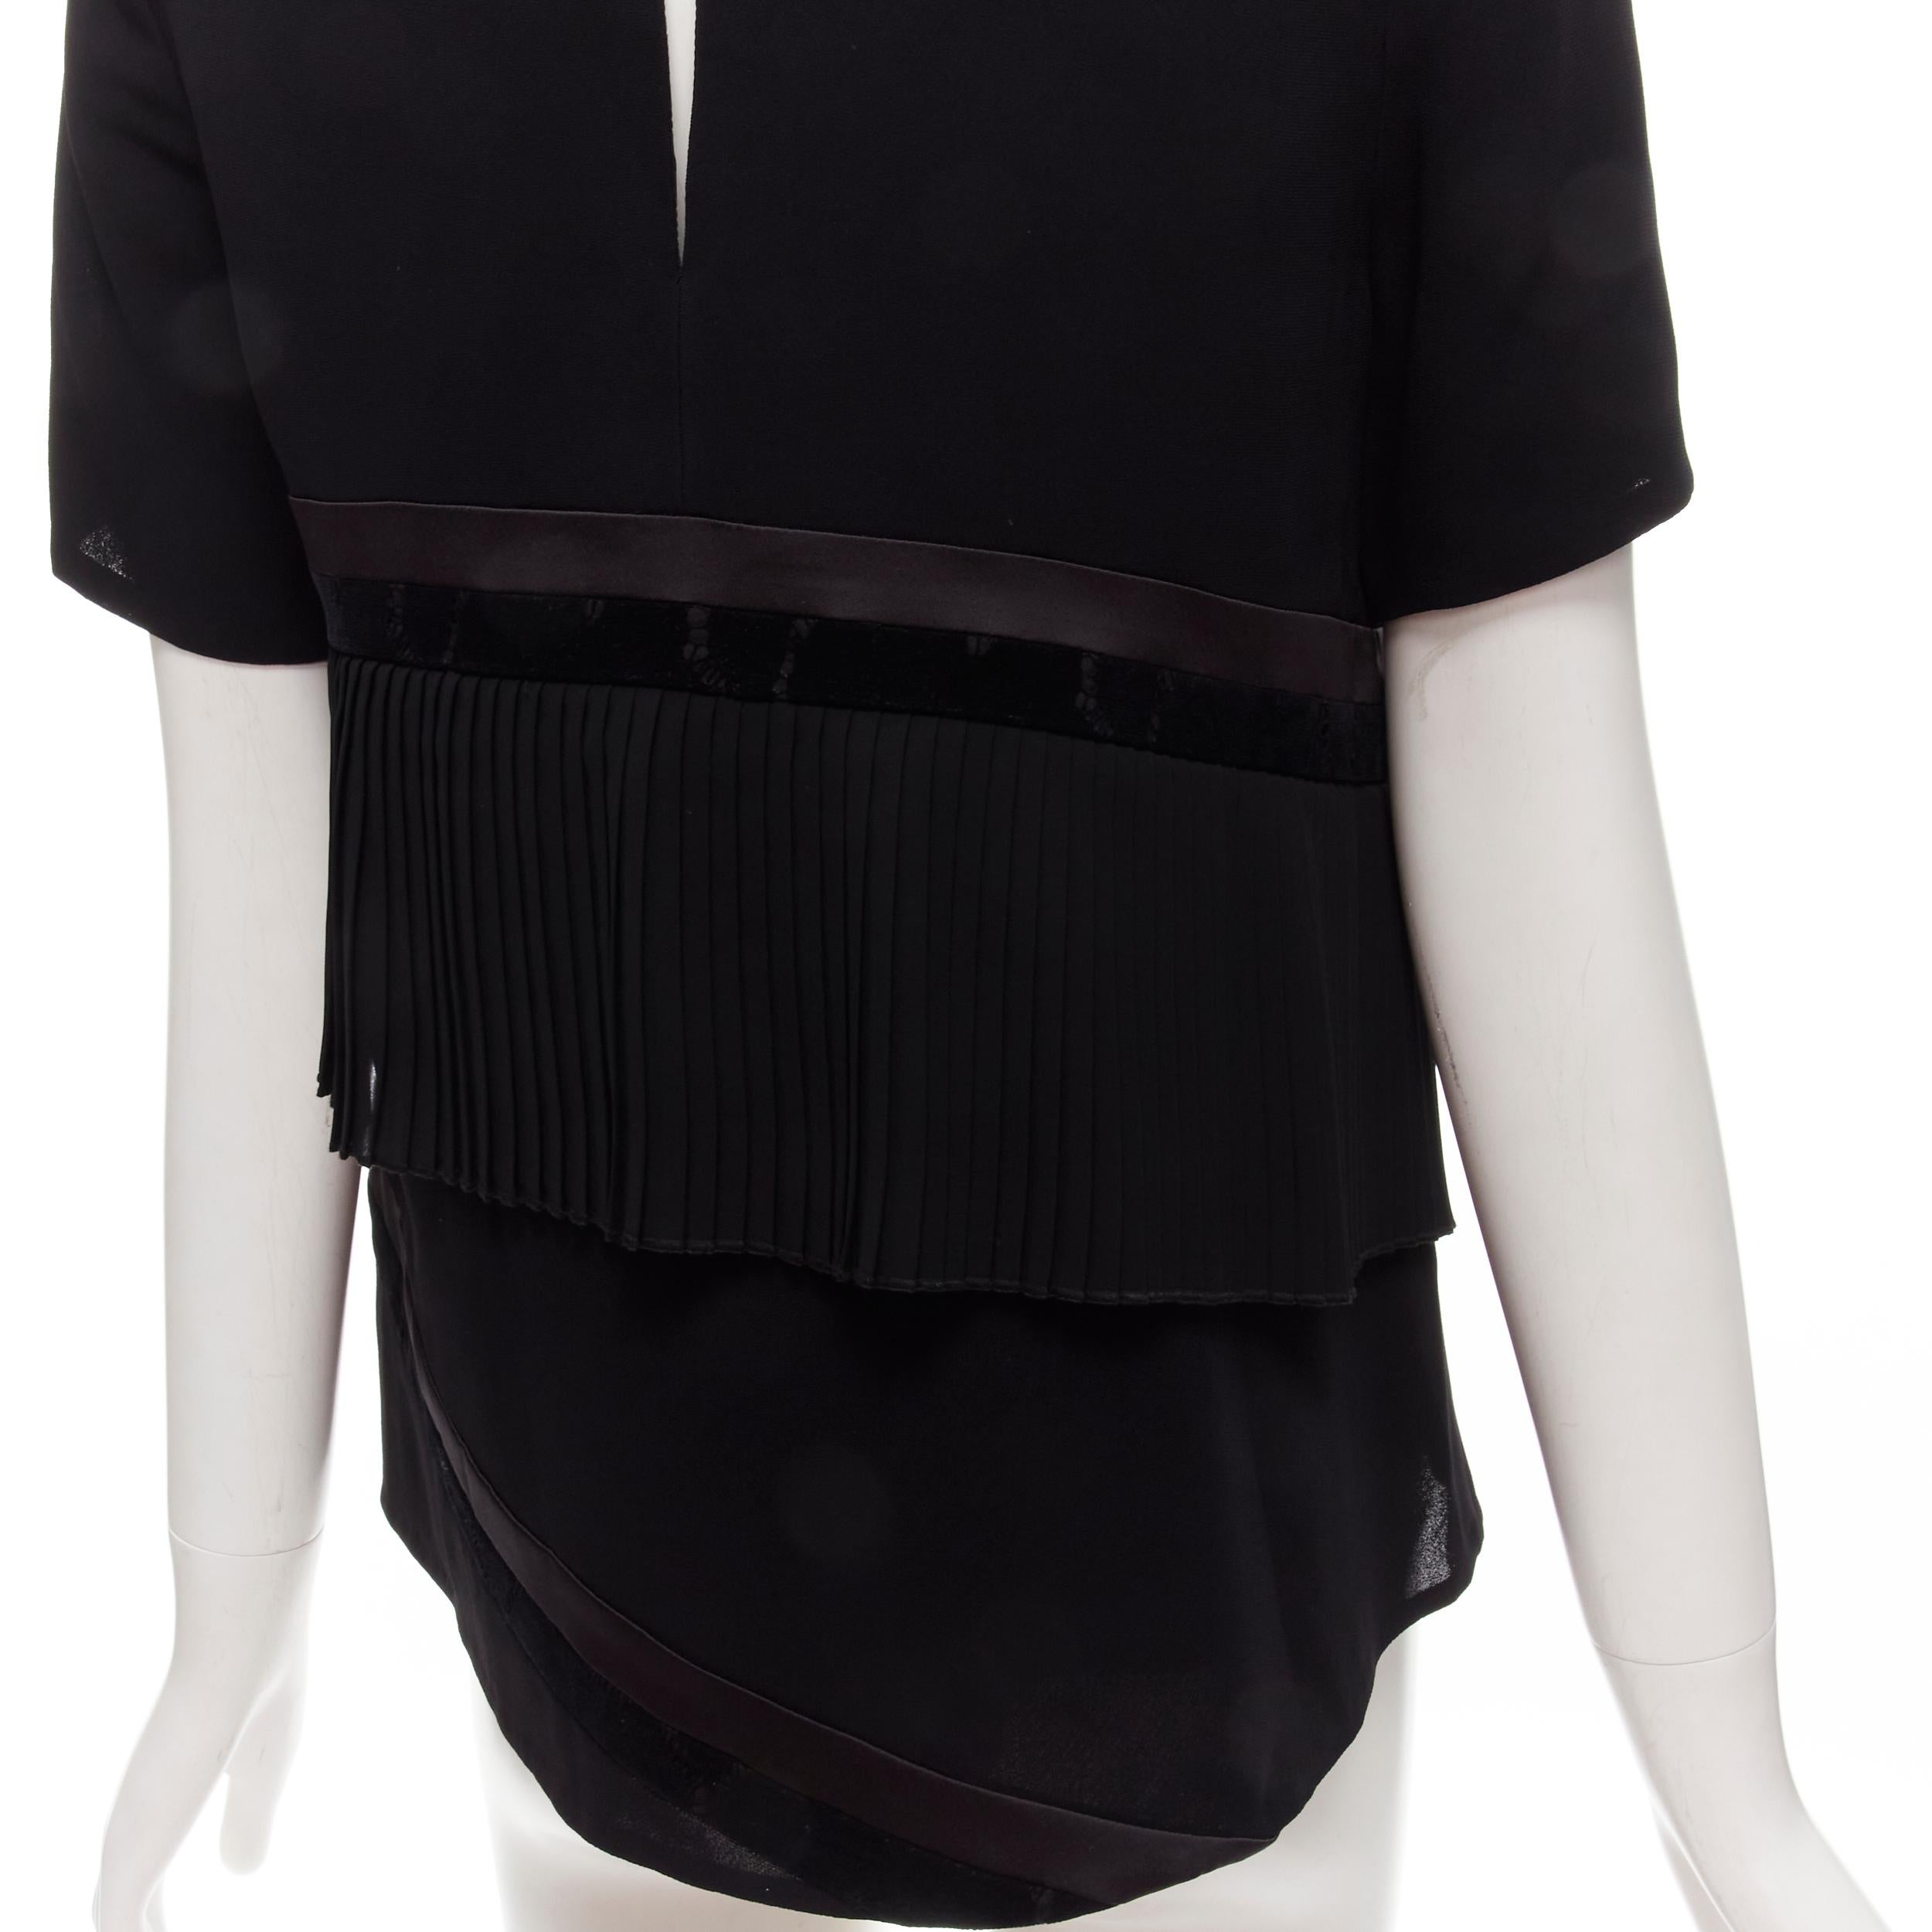 RHIE black satin velvet trim pleated ruffle boxy top US2 S
Brand: Rhie
Extra Detail: Satin and velvet trim. Pleated insert. Keyhole back.

CONDITION:
Condition: Excellent, this item was pre-owned and is in excellent condition. 

SIZING:
Designer